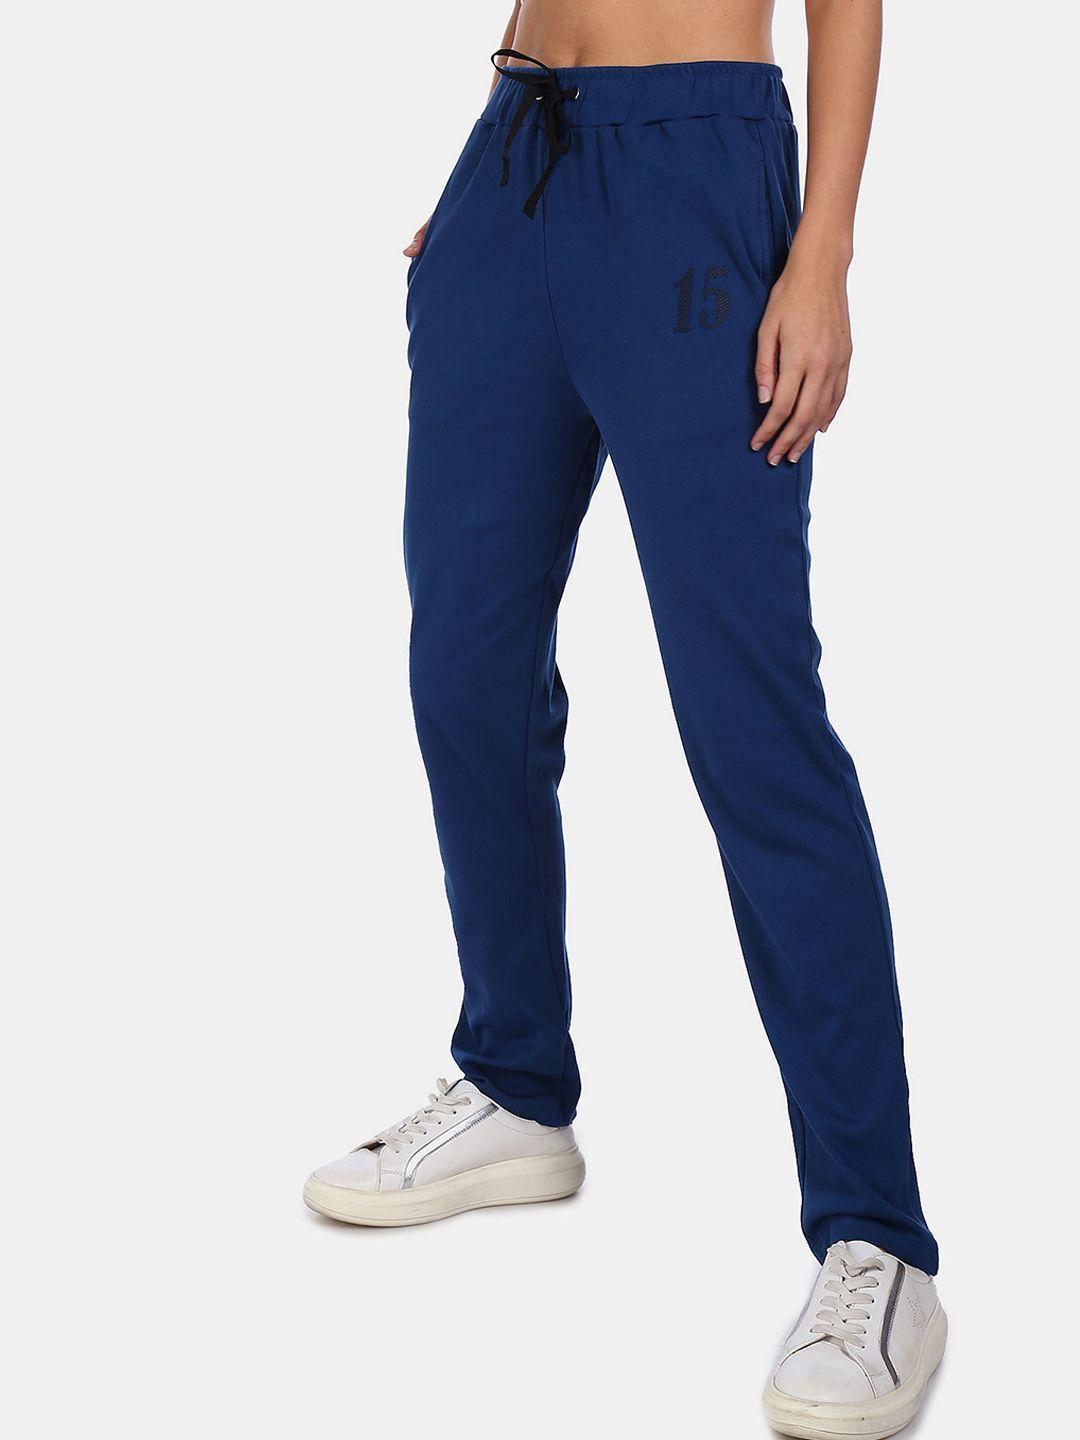 sugr women navy blue solid track pants